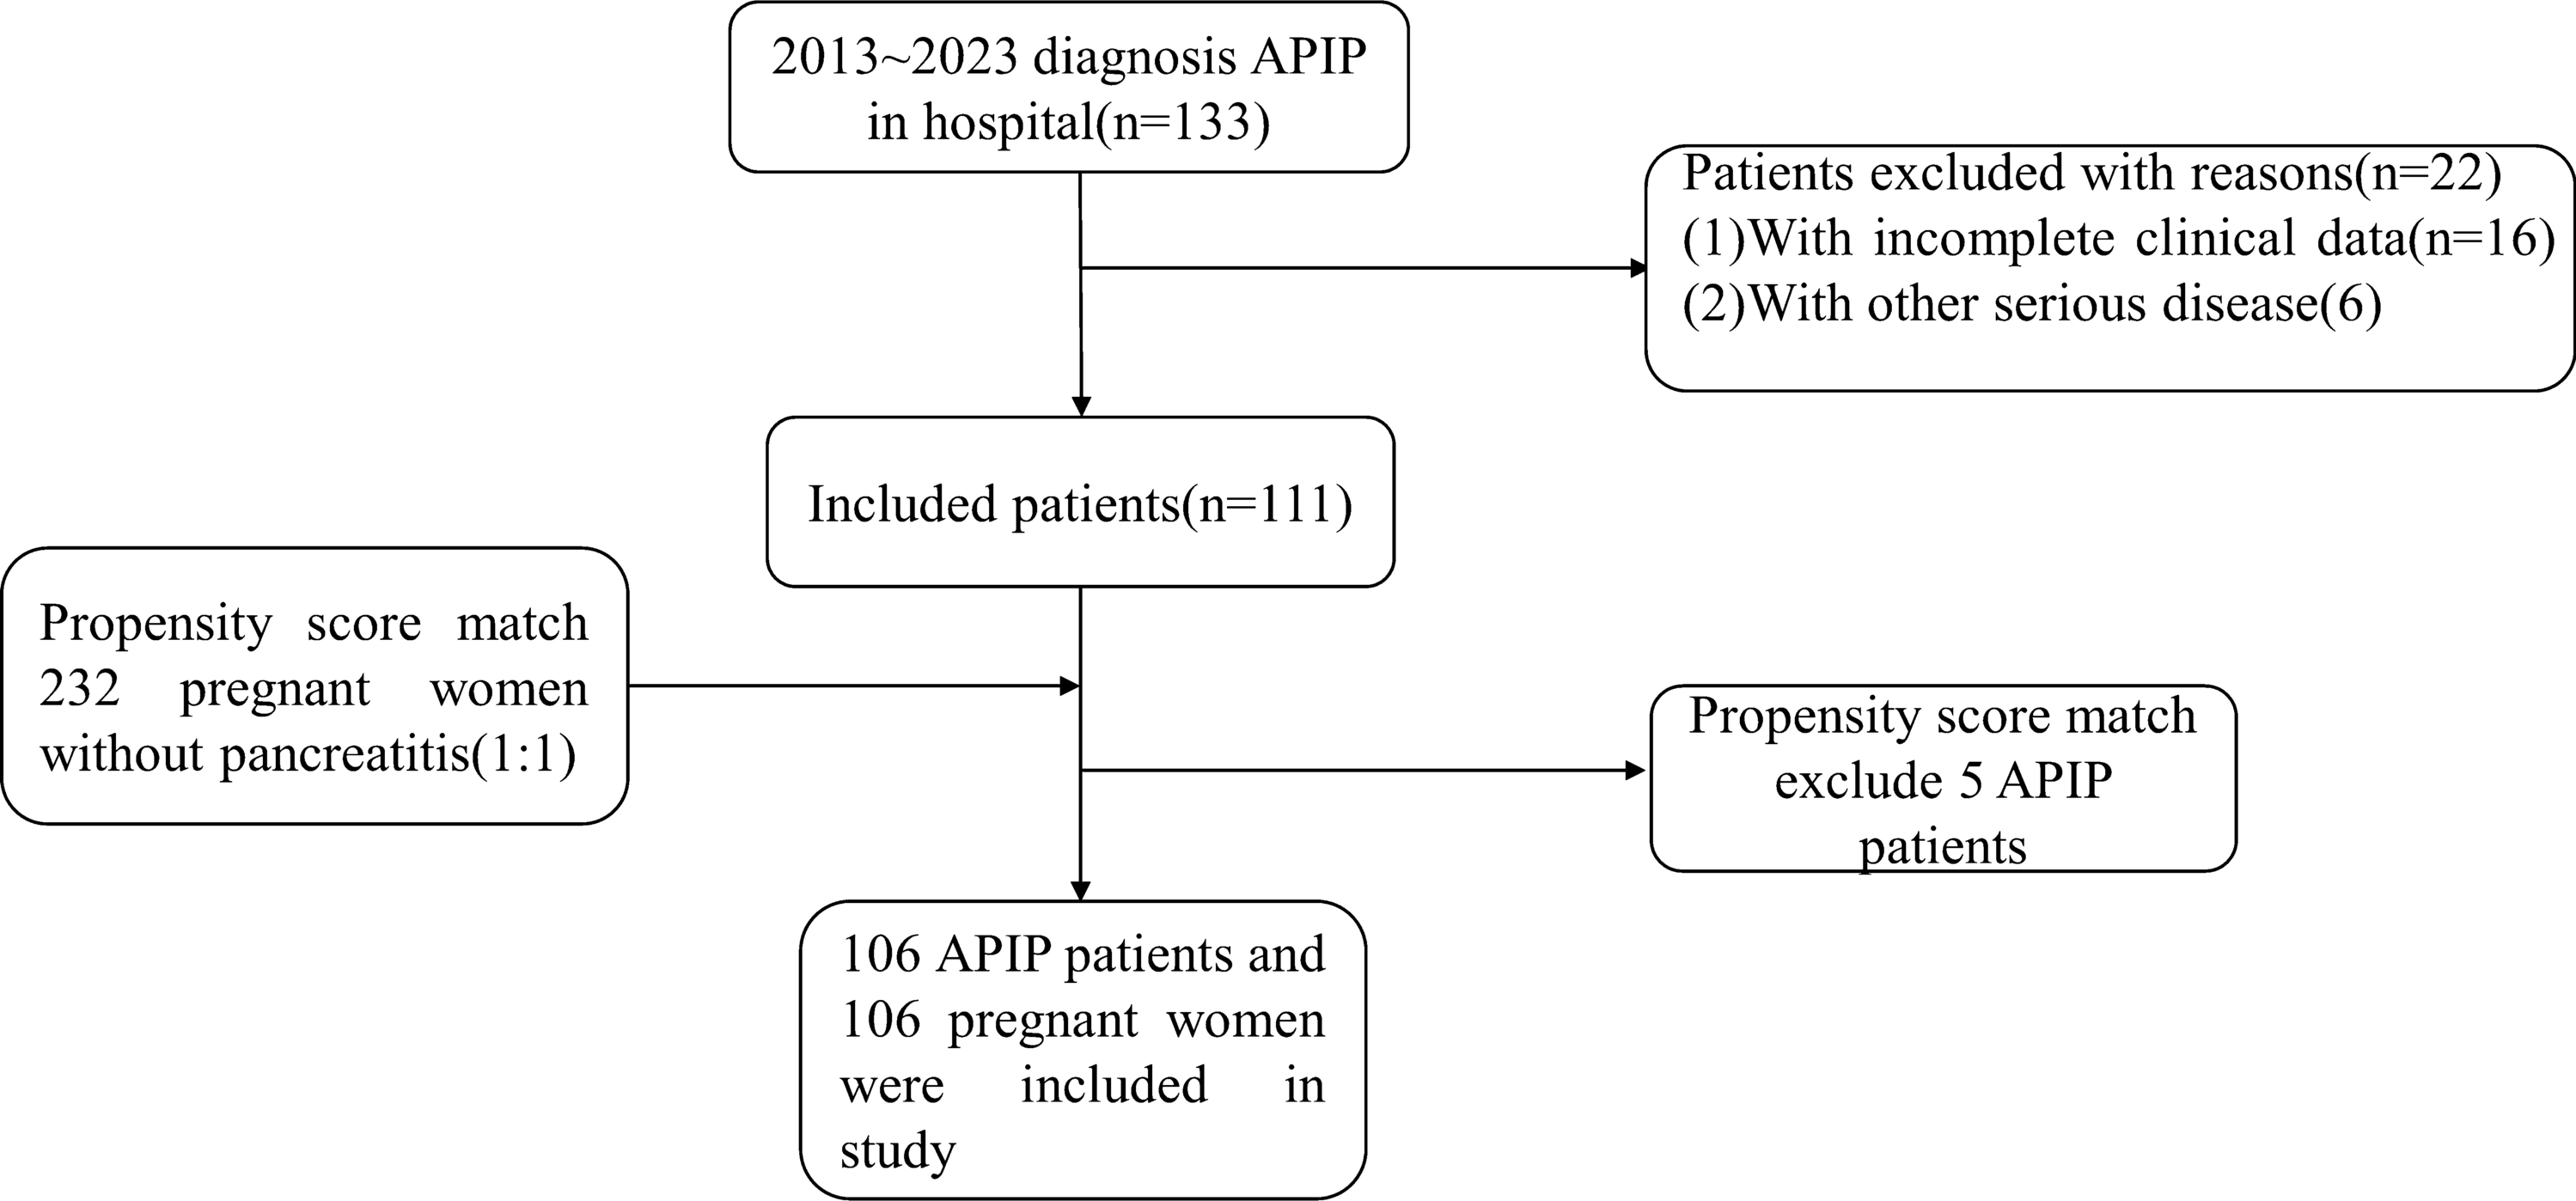 Acute Pancreatitis in Pregnancy: A Propensity Score Matching Analysis and Dynamic Nomogram for Risk Assessment